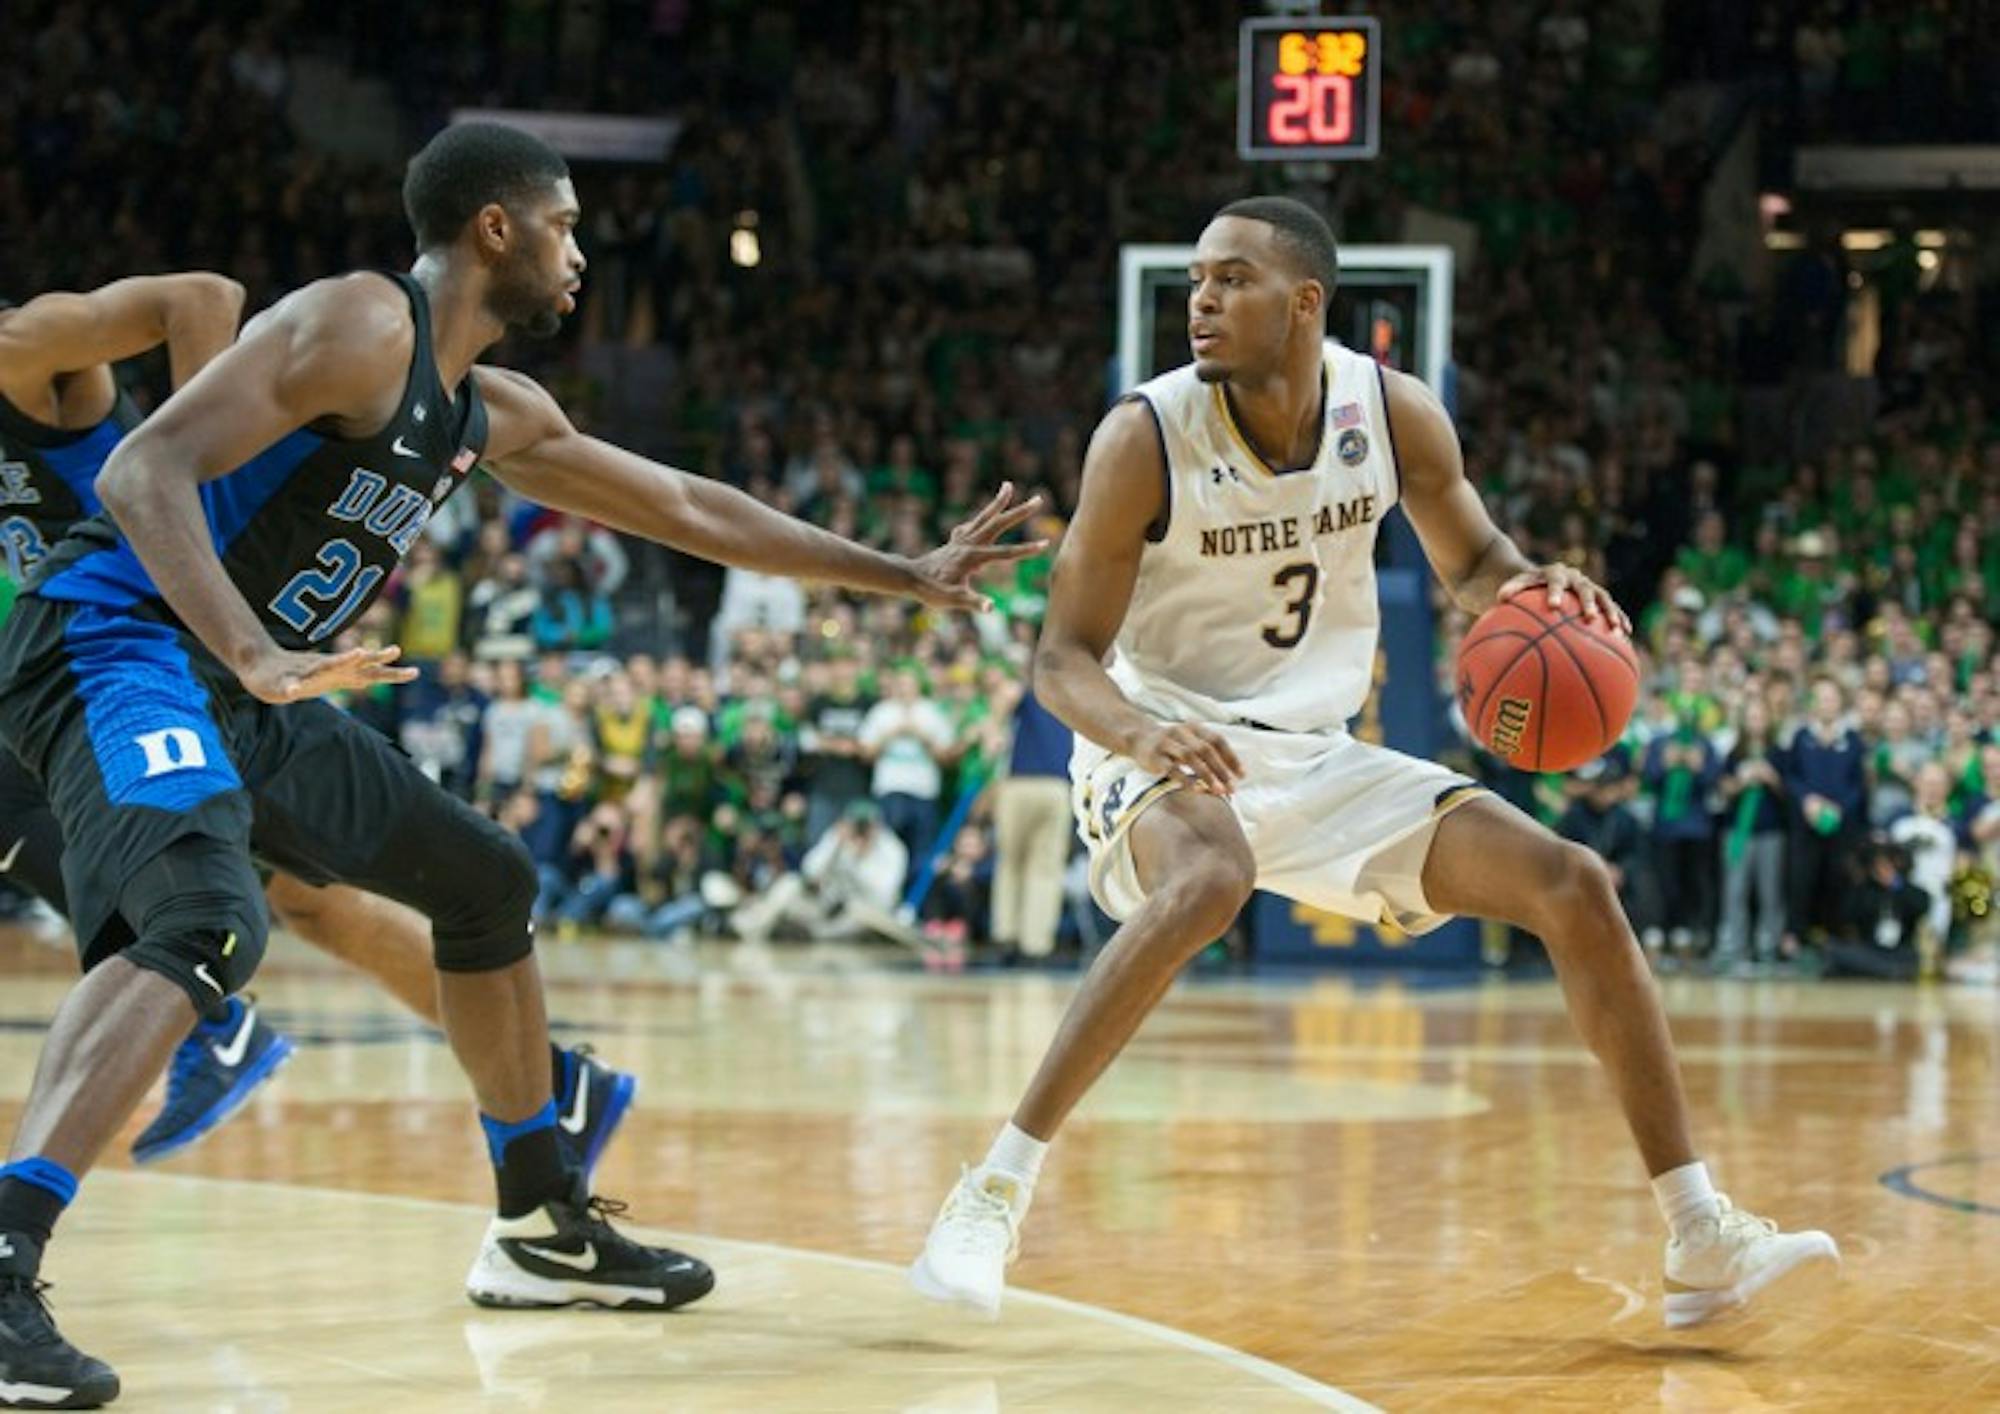 Irish junior forward V.J. Beachem dribbles away from a defender during Notre Dame’s 84-74 loss to Duke on Monday at Purcell Pavilion. Beachem paced the Irish with 20 points against the Blue Devils.